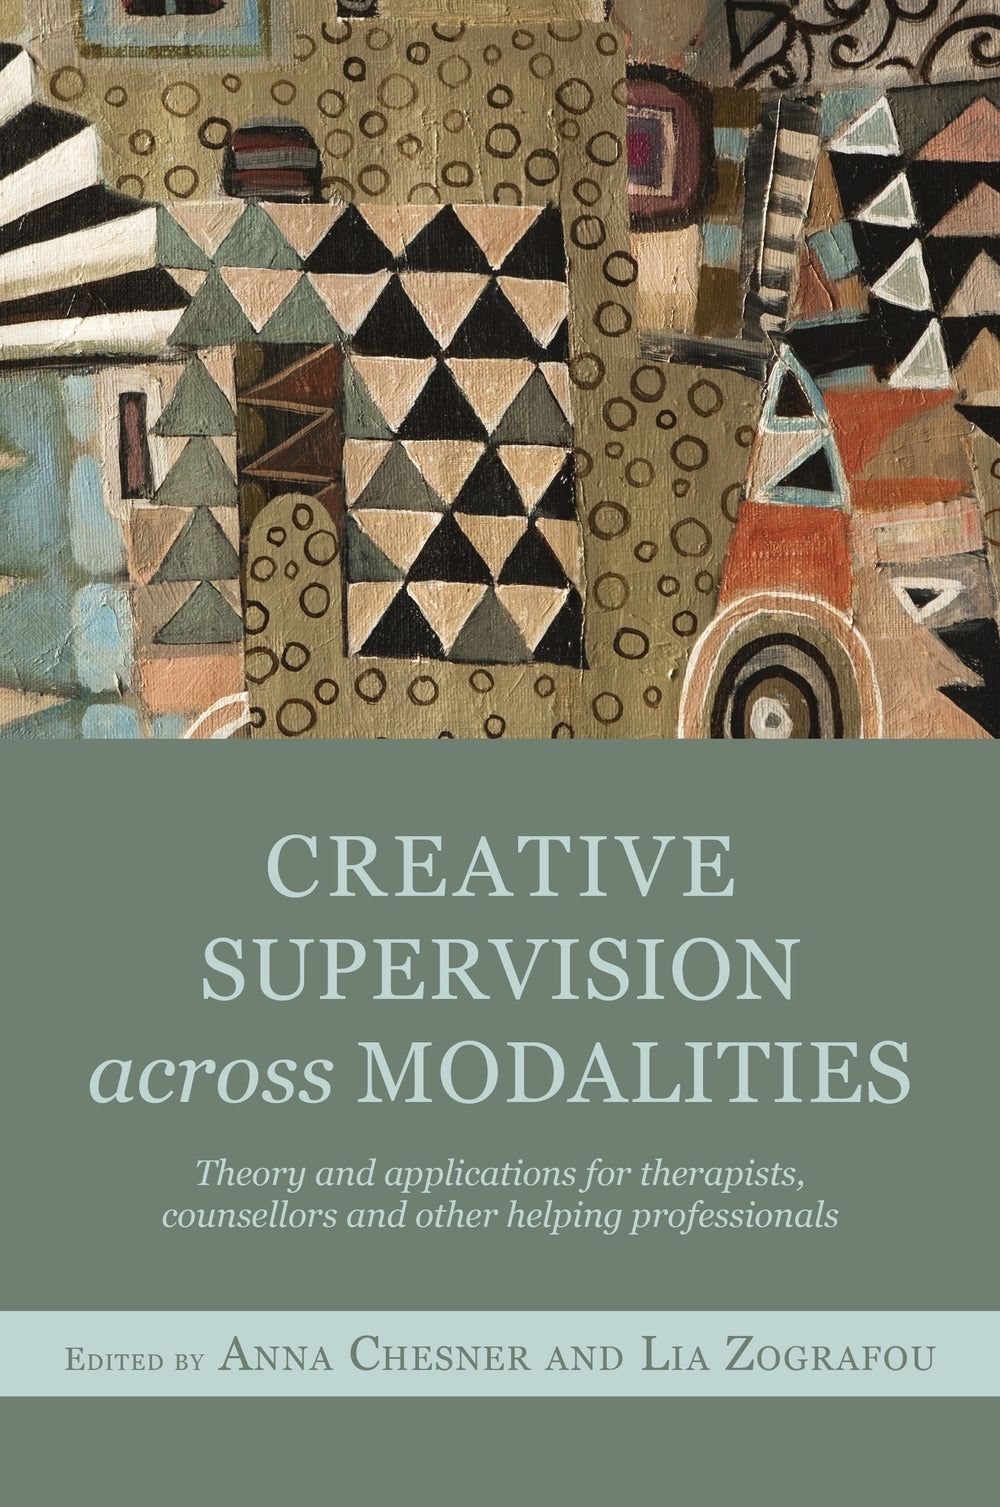 Creative Supervision Across Modalities by Anna Chesner, Lia Zografou, No Author Listed